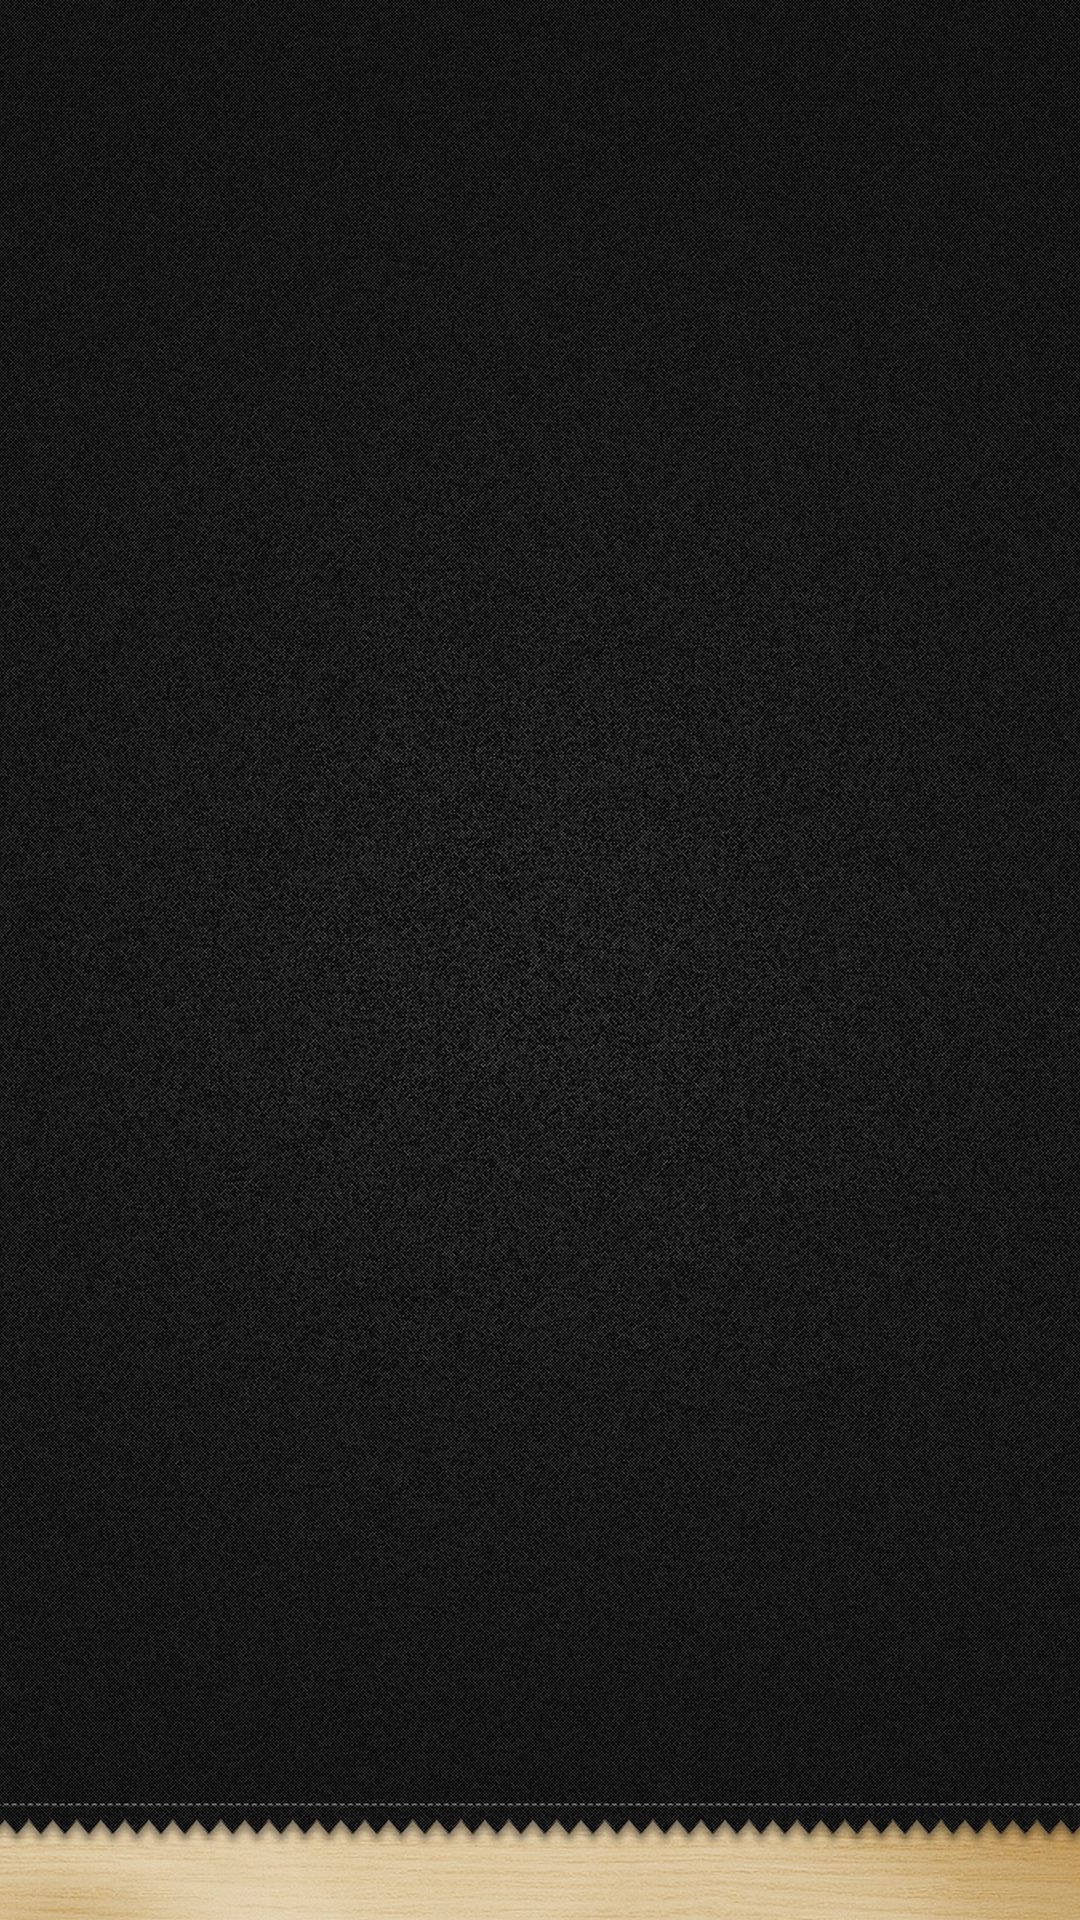 Wallpapers for Galaxy - Black Wool Fabric 2